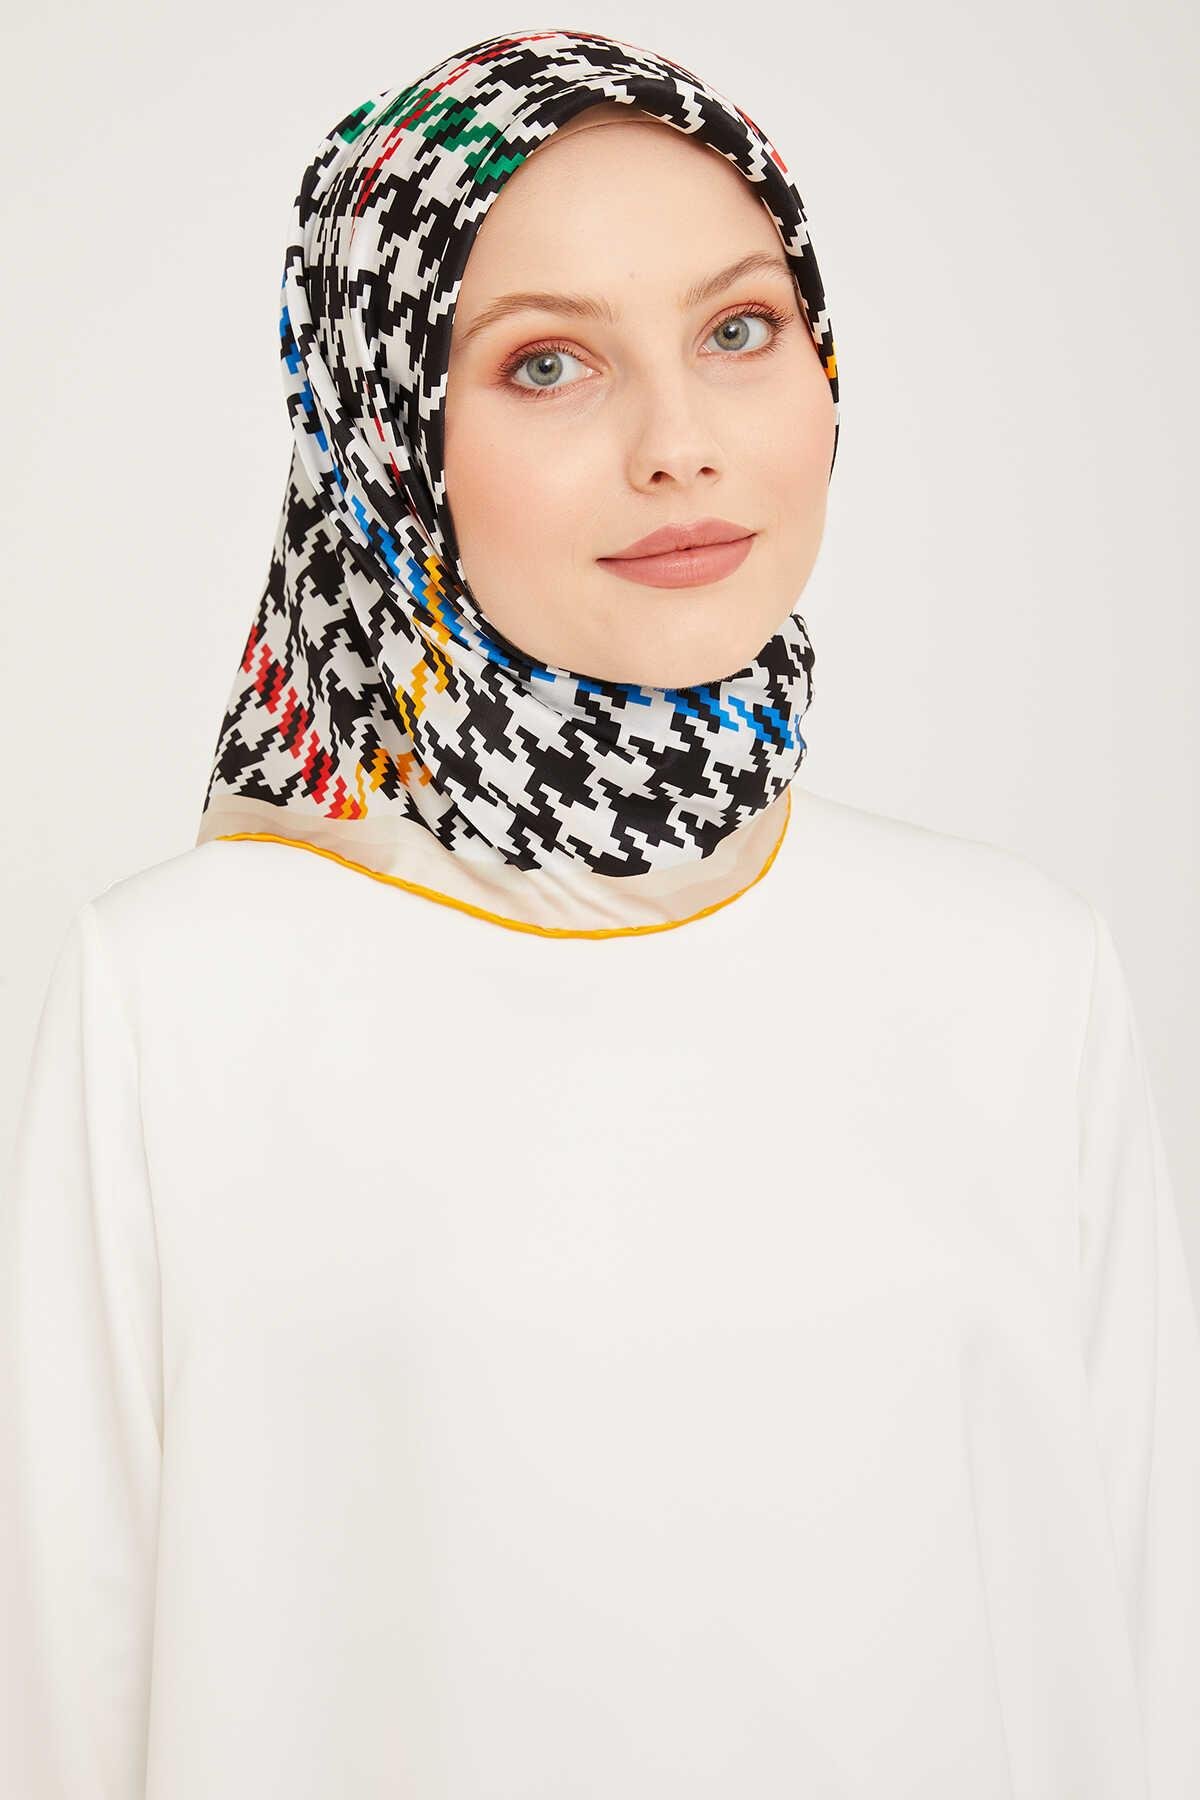 Armine Yellow Patterned Twill Silk Scarf 9000-09 Color: Black, white,  yellow, red, green, blue